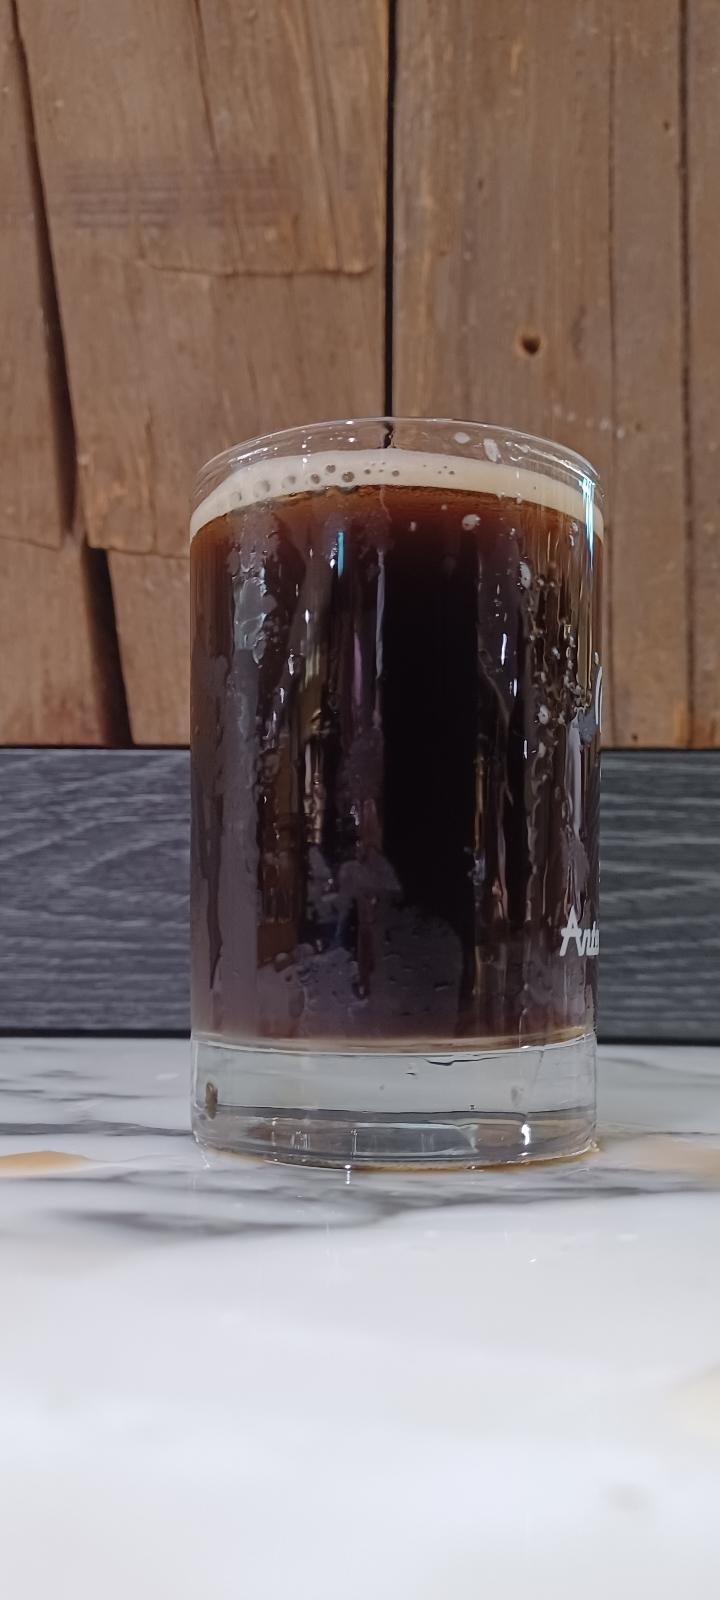 Molasses Ginger Cookie Imperial Stout